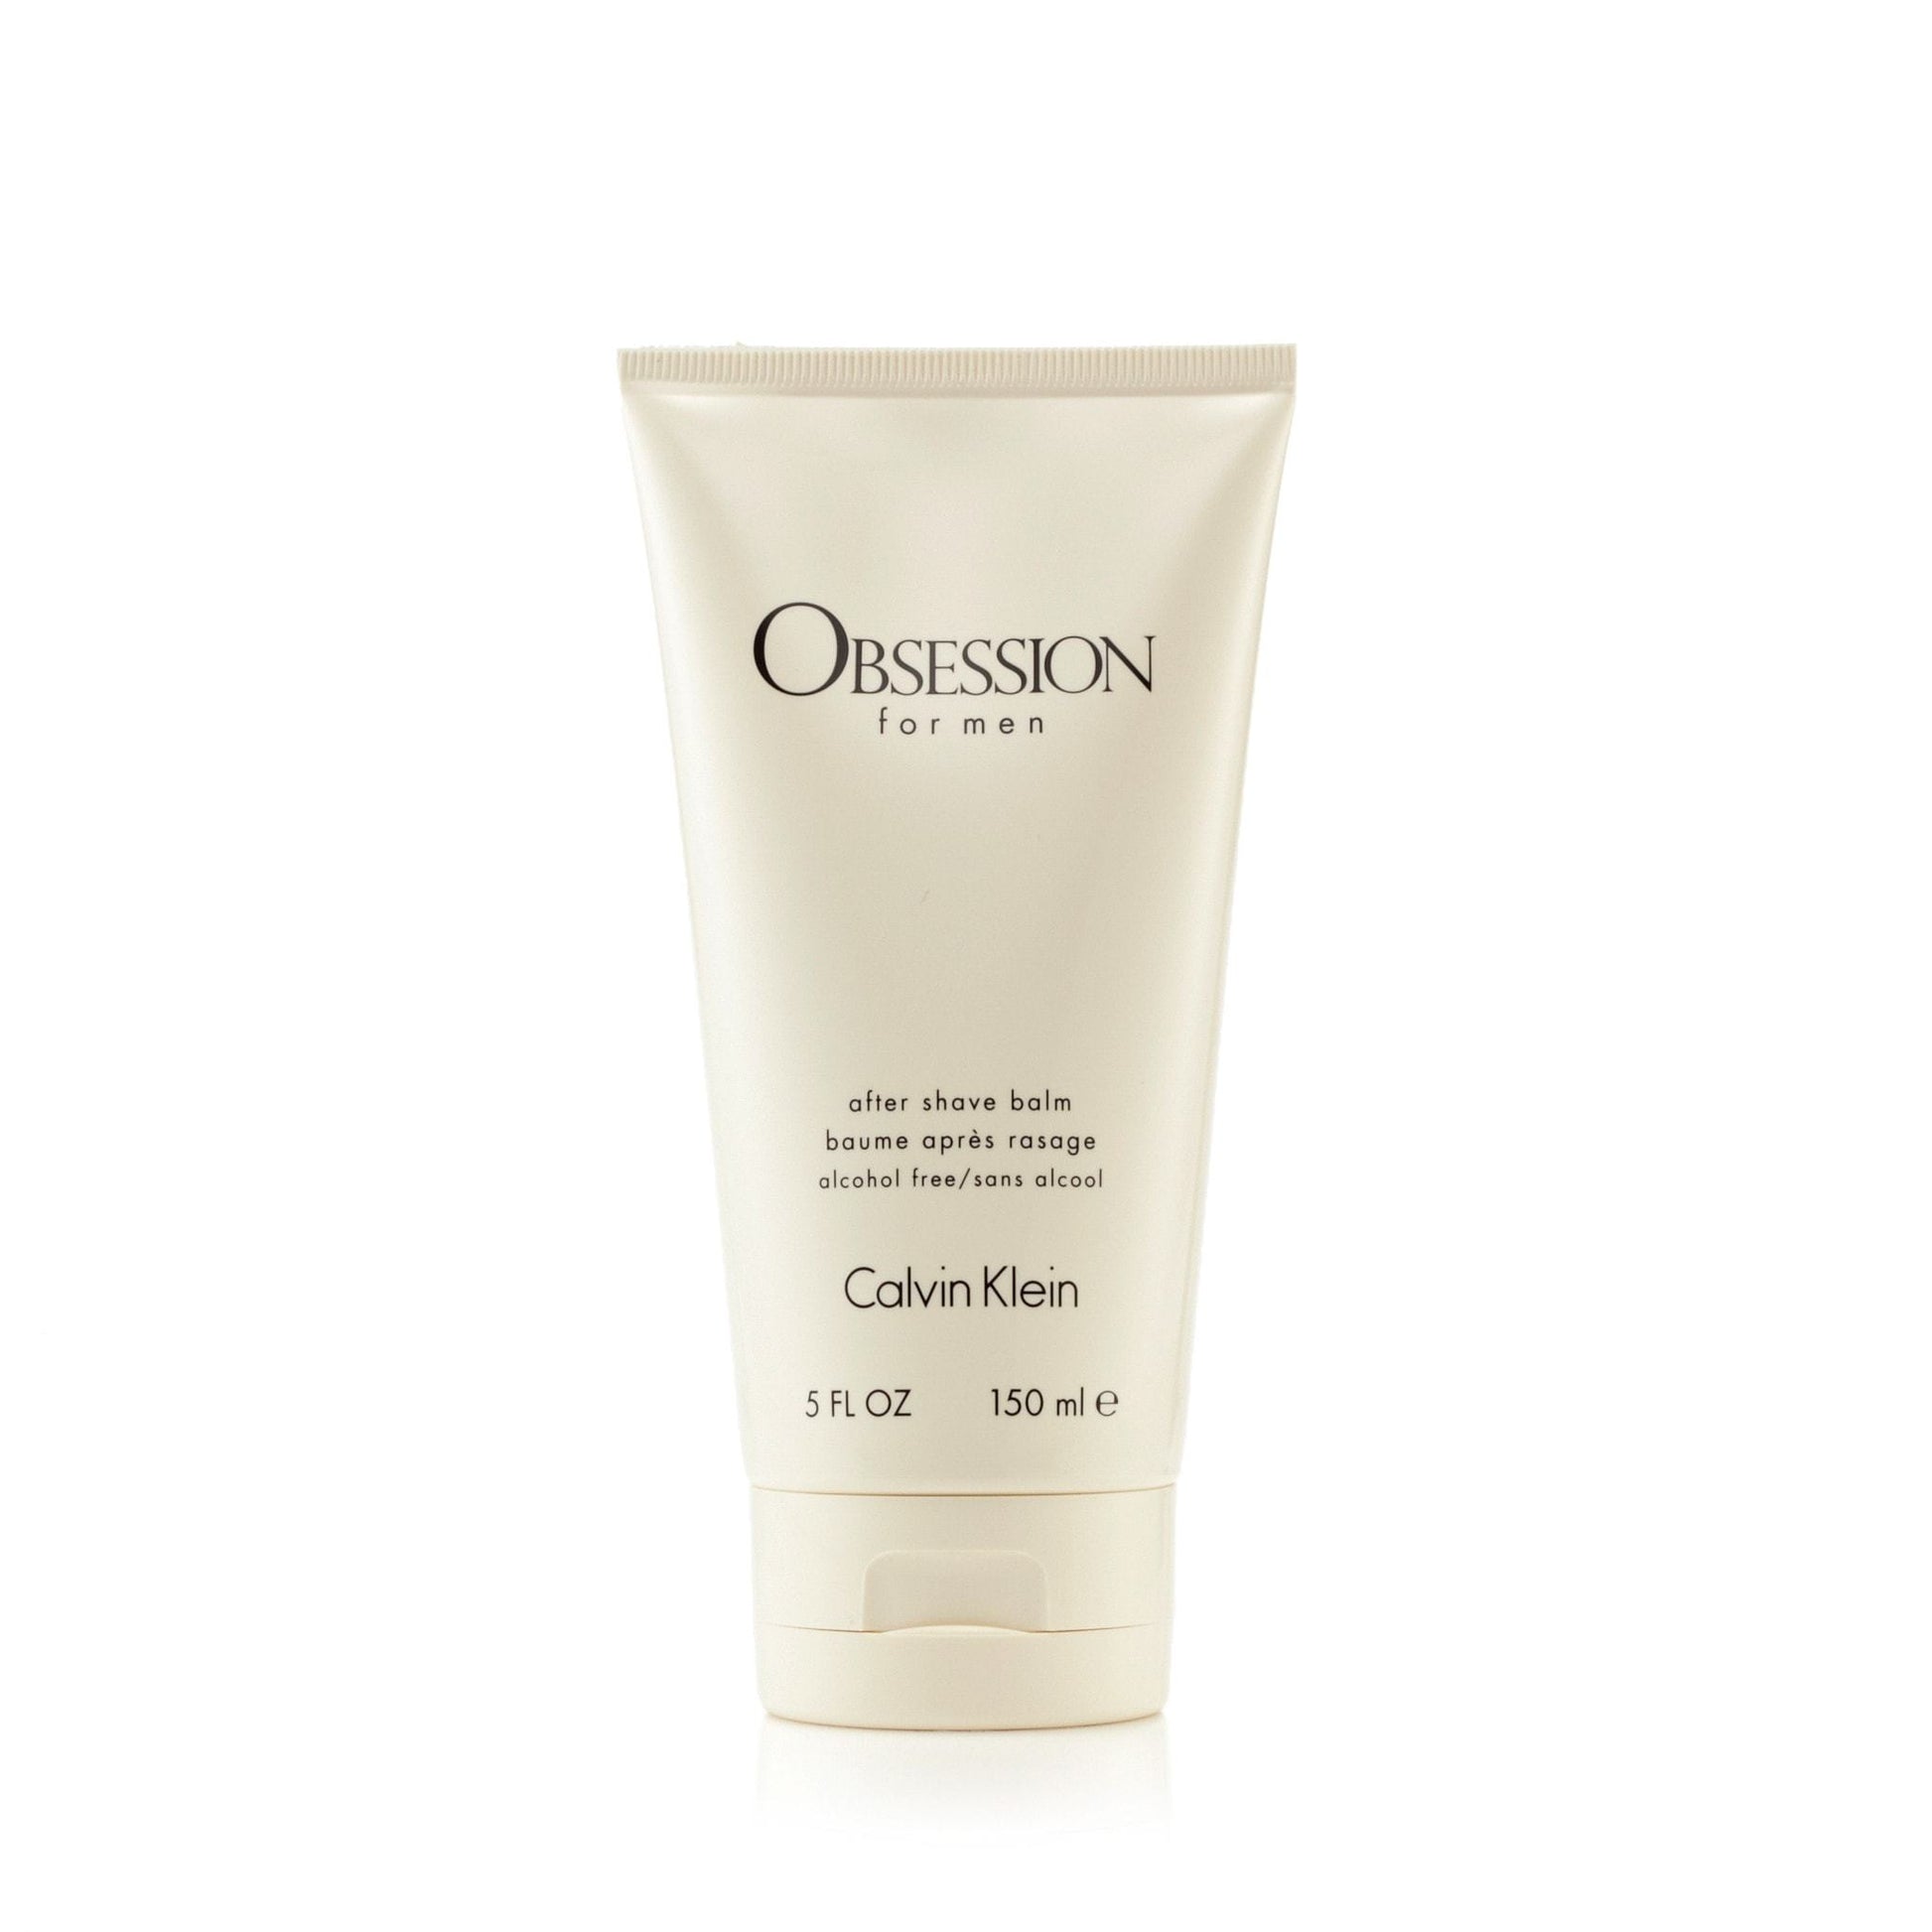 Obsession After Shave Balm for Men by Calvin Klein, Product image 1